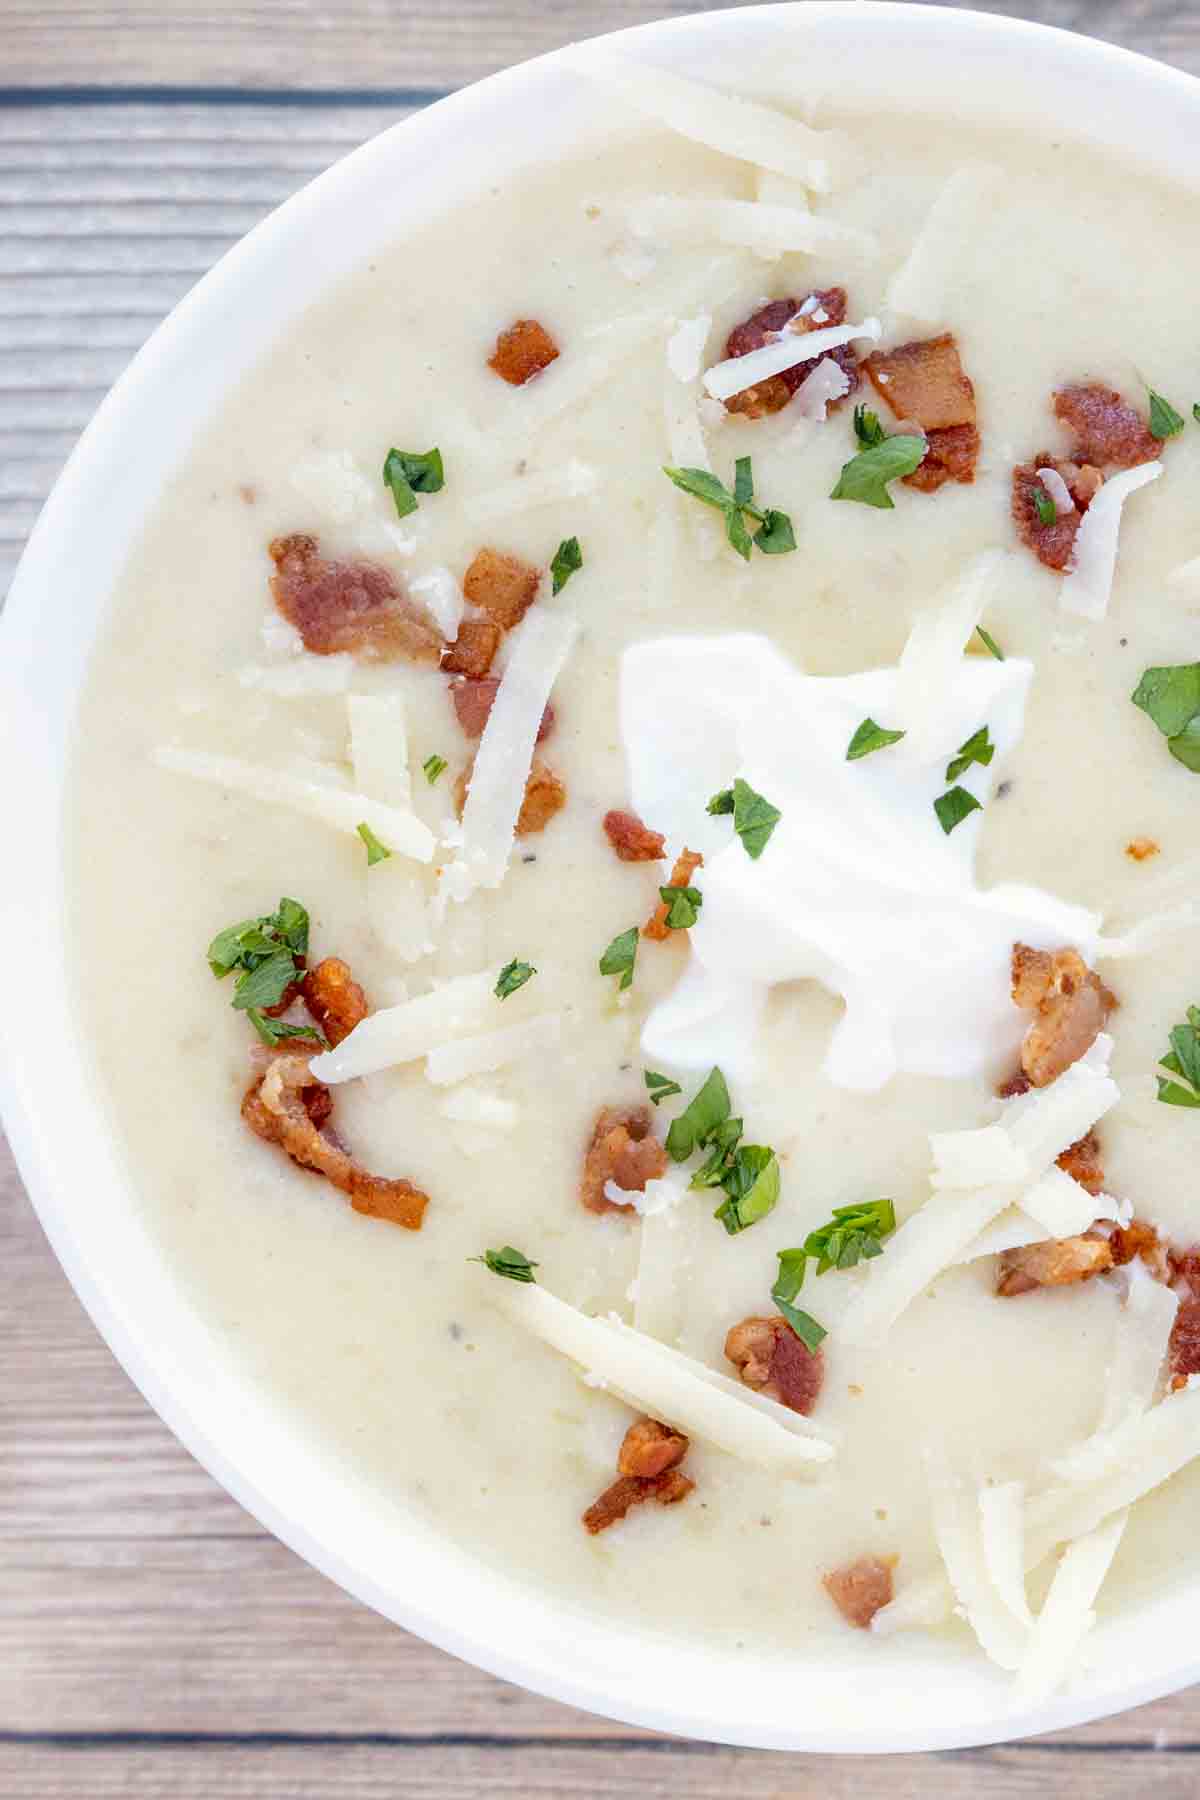 potato soup with bacon bits, sour cream and cheddar cheese topping in a white bowl